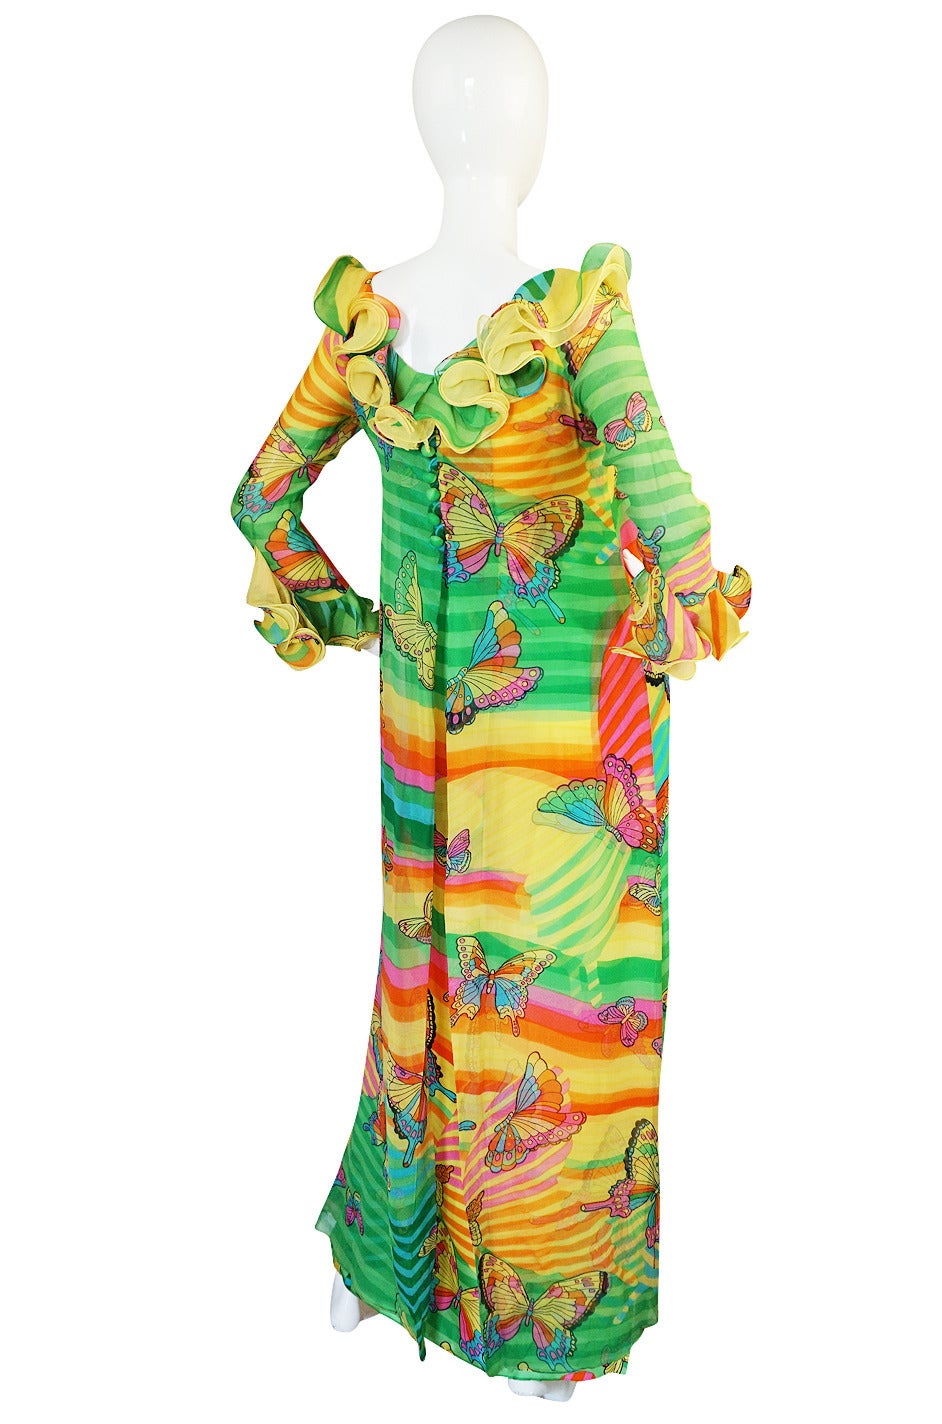 This bold and dramatic silk chiffon dress is instantly recognizable as a Hanae Mori piece. Her signature butterflies flit over its surface in an exuberant explosion of color. I absolutely love the bright color palette and find the boldness of it to